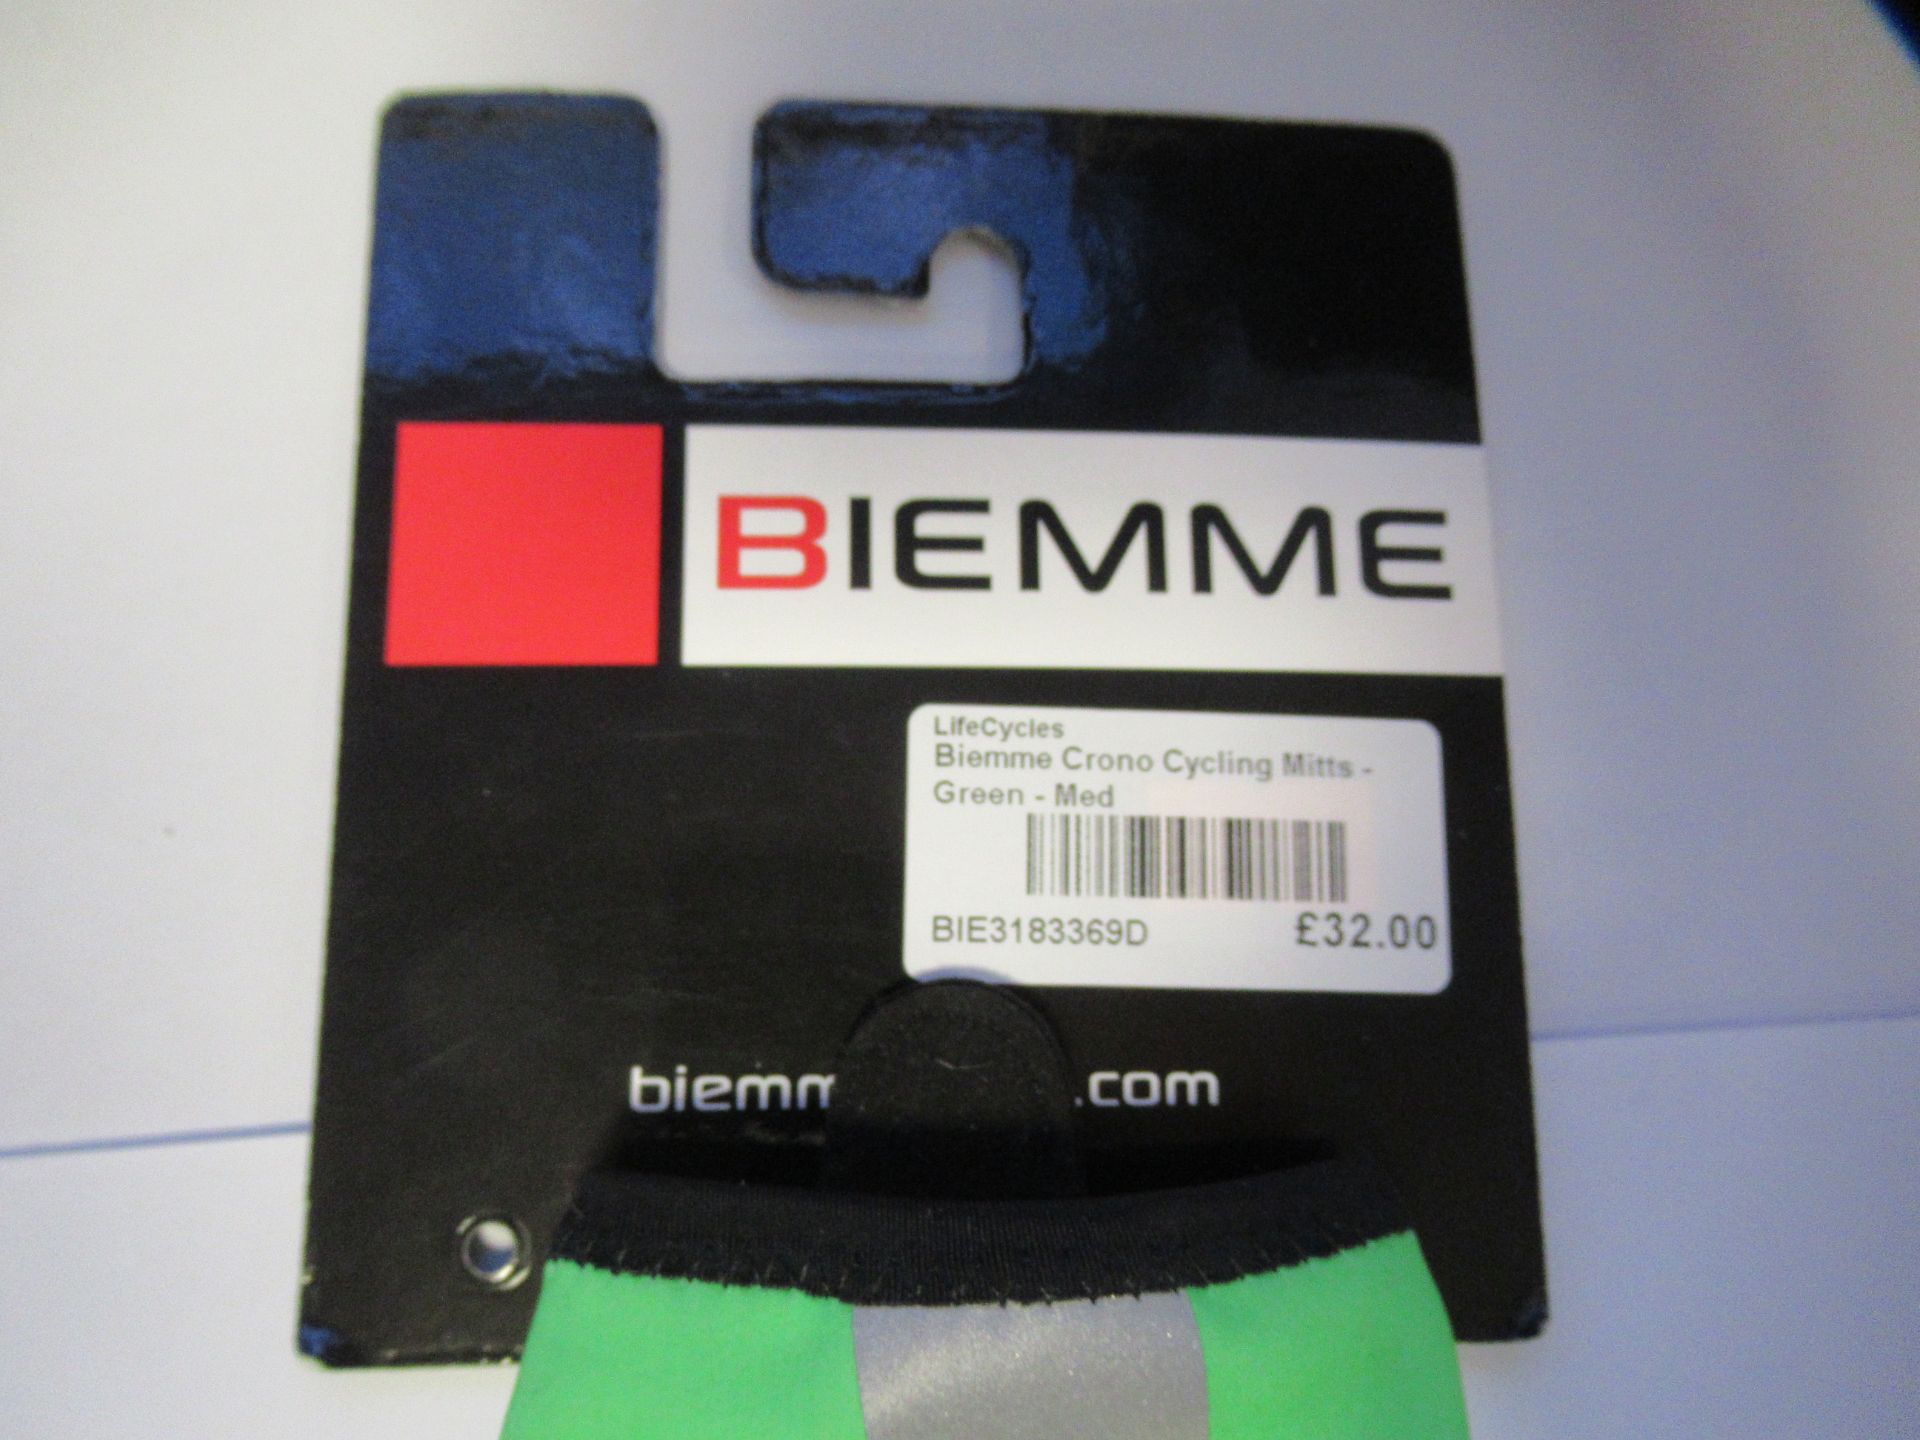 Bicycle Gloves, Size Medium, to include 4x Biemme B-crono Gloves Pink, RRP £36 each; 1x Biemme Crono - Image 5 of 11